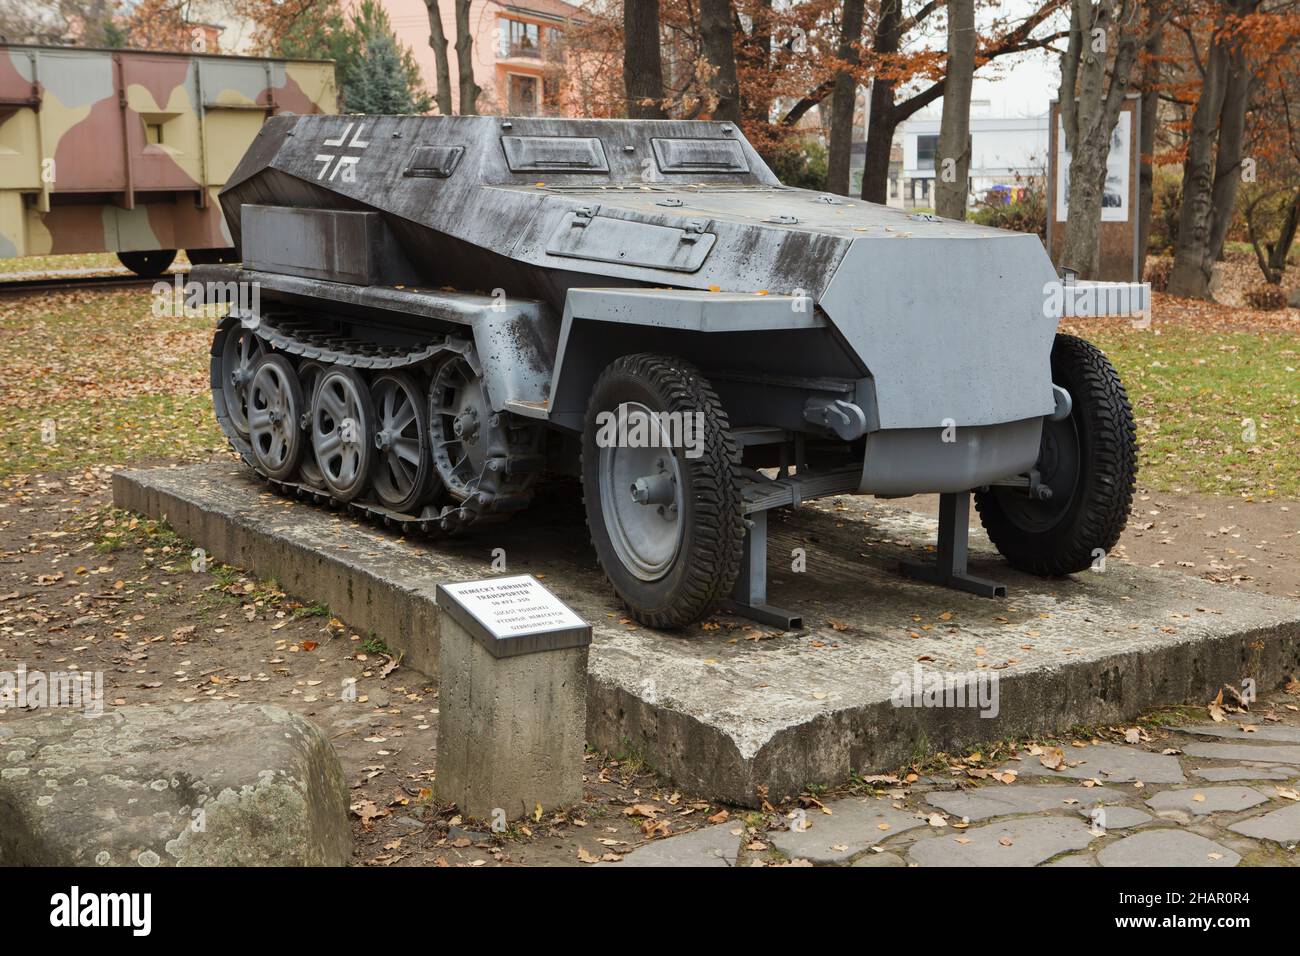 German half-track armoured personnel carrier Sd.Kfz. 250 used during World War II on display next to the Museum of the Slovak National Uprising (Múzeum Slovenského národného povstania) in Banská Bystrica, Slovakia. Stock Photo